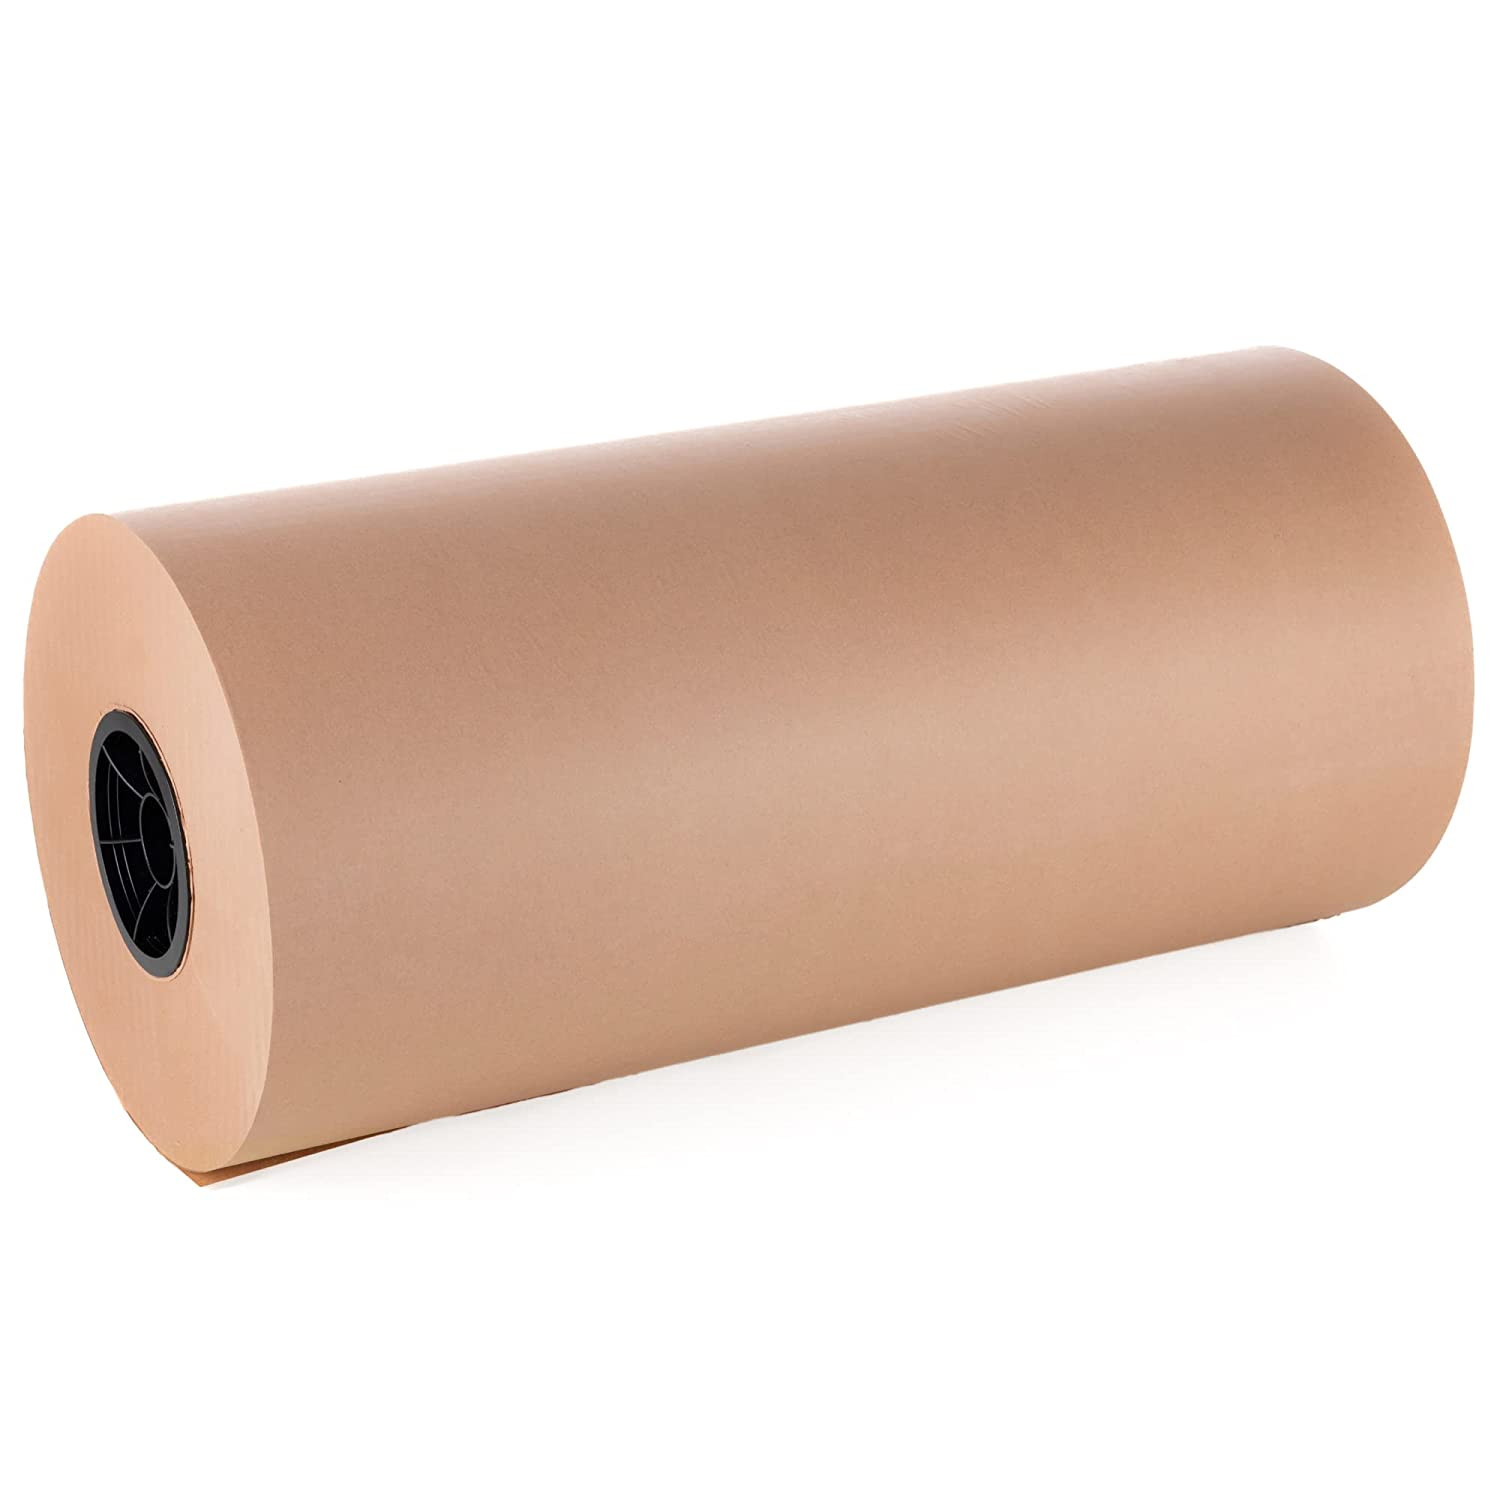 Shipping Paper Roll 1440'L X 24W, 1-Pack